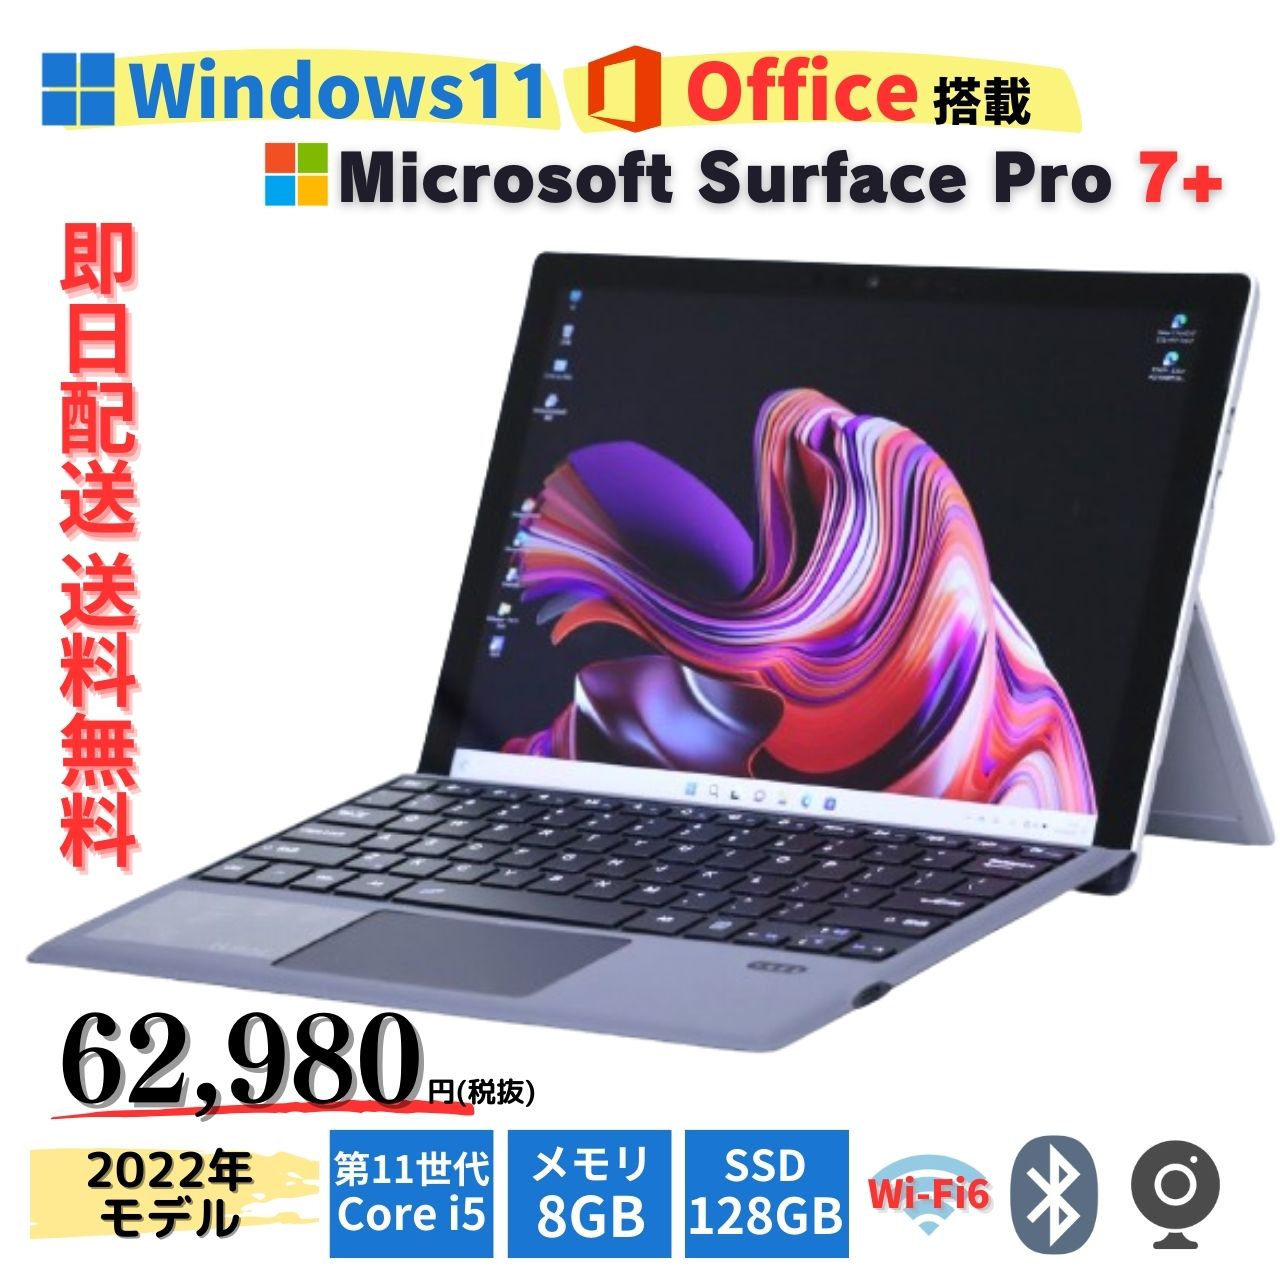 [ immediately distribution ] first arrival 5 car limitation special price! Win11 Office2021 LTE Surface Pro 7+ i5-1135G7 RAM8G SSD256G 12.3 type PixelSense WiFi6 new goods keyboard addition possible 